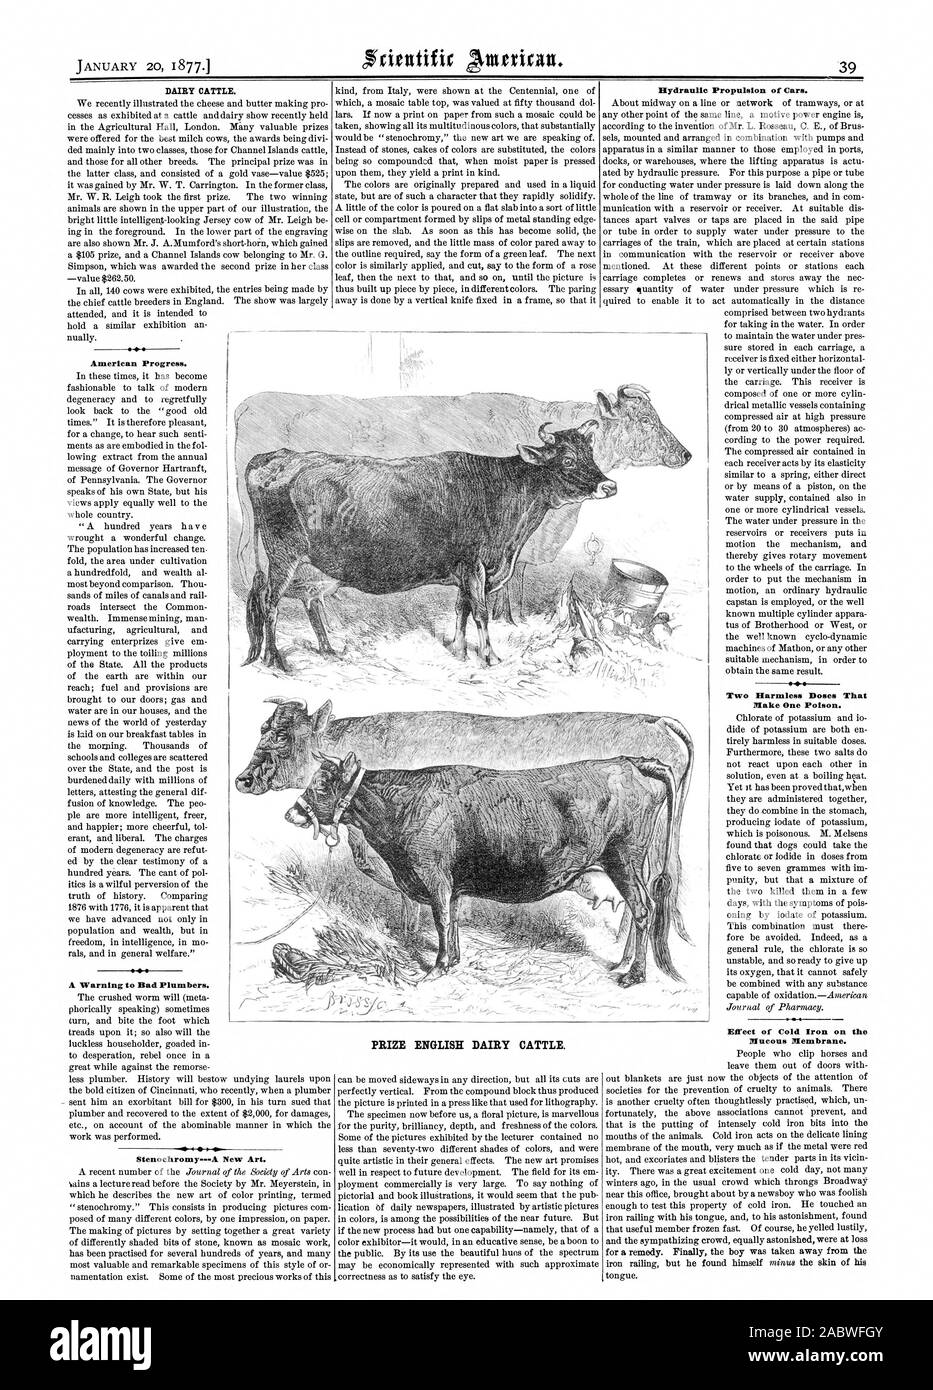 DAIRY CATTLE. American Progress. A Warning to Bad Plumbers. StenochromyA New Art. PRIZE ENGLISH DAIRY CATTLE. Hydraulic Propulsion of Cars. Two Harmless Doses That Make One Poison. Effect of Cold Iron on the Mucous Membrane., scientific american, 1877-01-20 Stock Photo